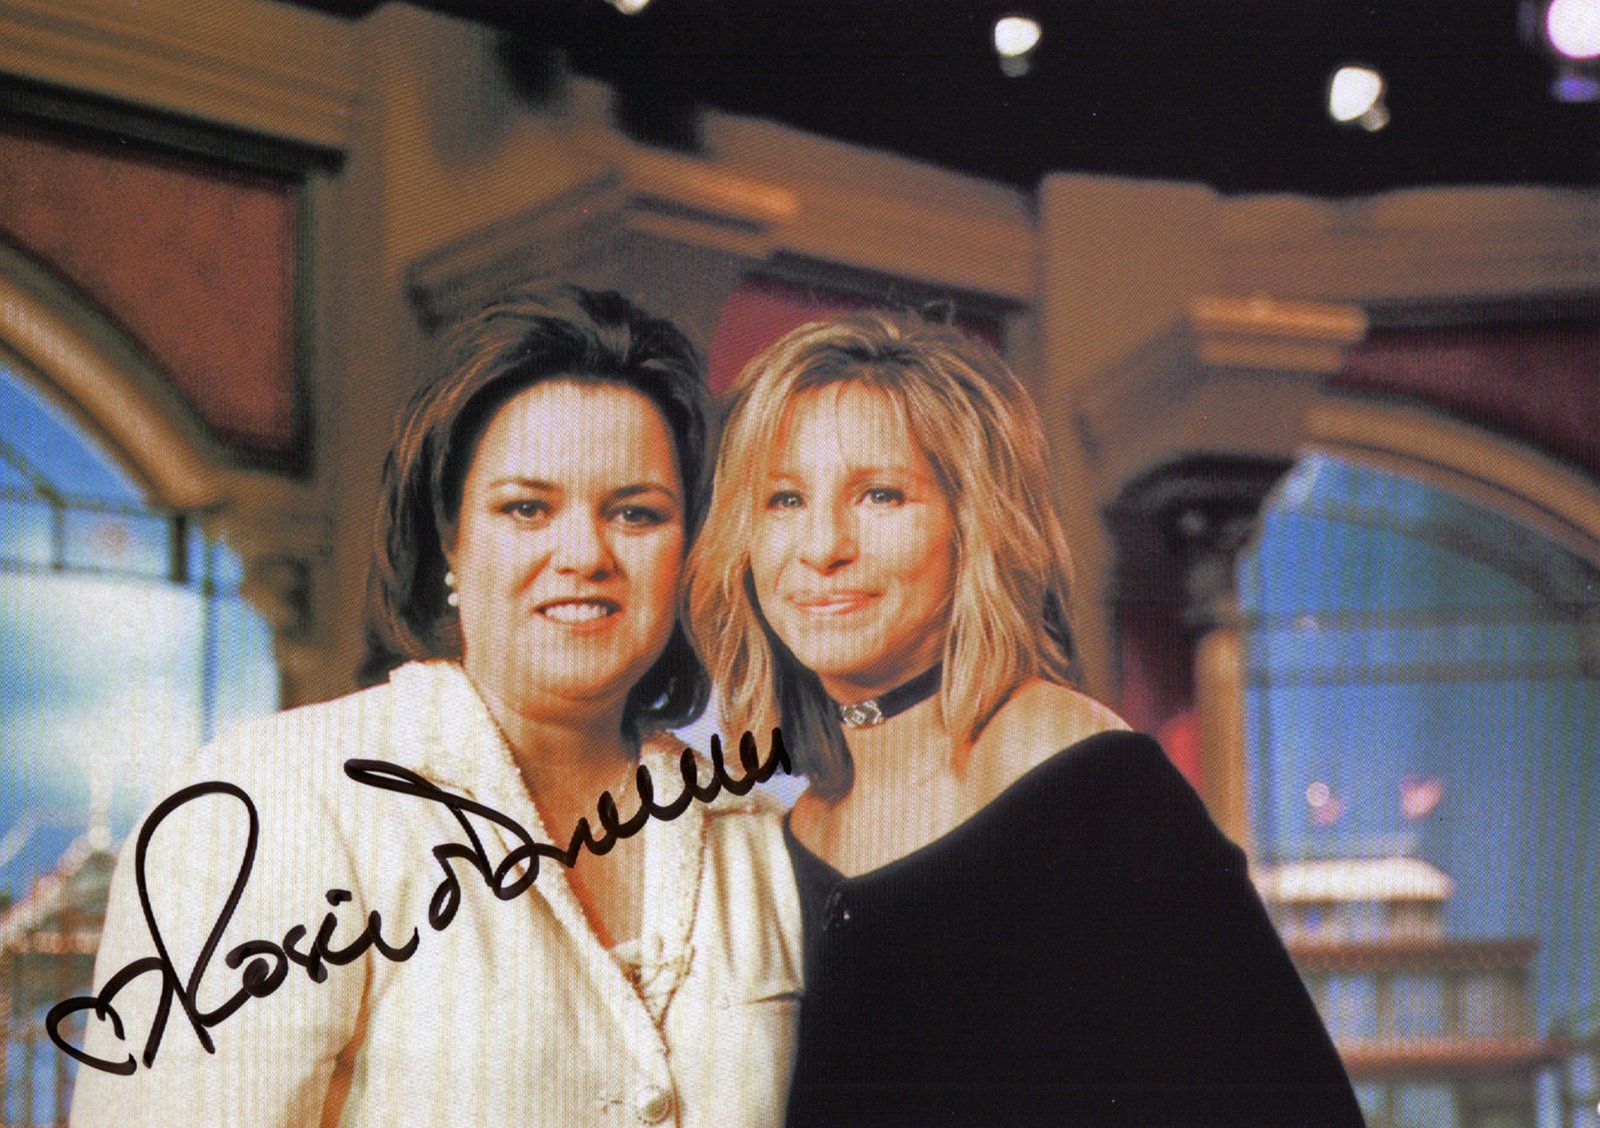 Rosie O'Donnell and Barbra Streisand, 1997.